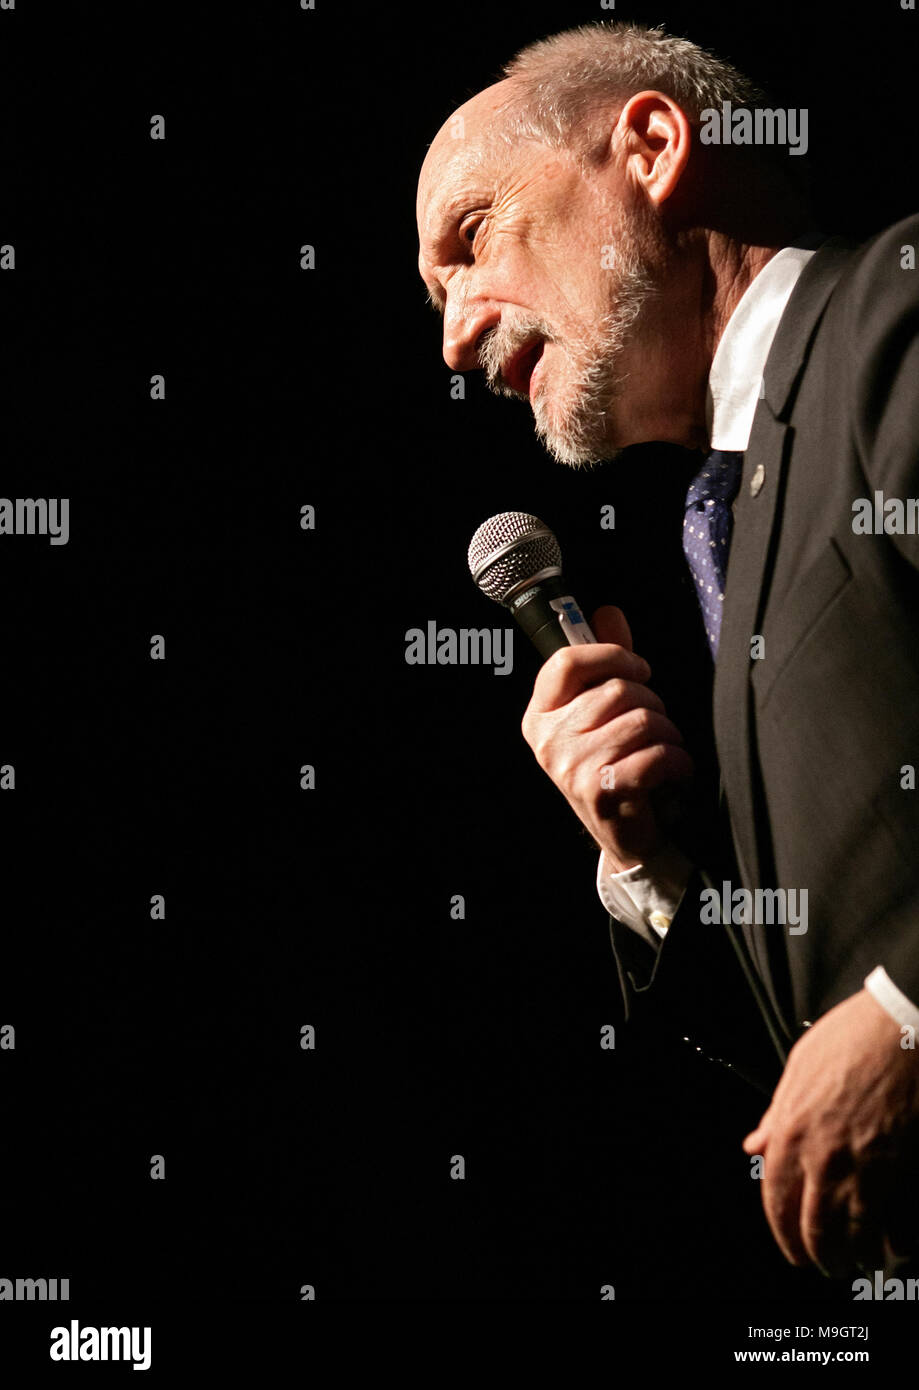 ZAMOSC, POLAND - APRIL 20, 2013:  Former Minister of National Defence Antoni Macierewicz during one of his speech. Stock Photo